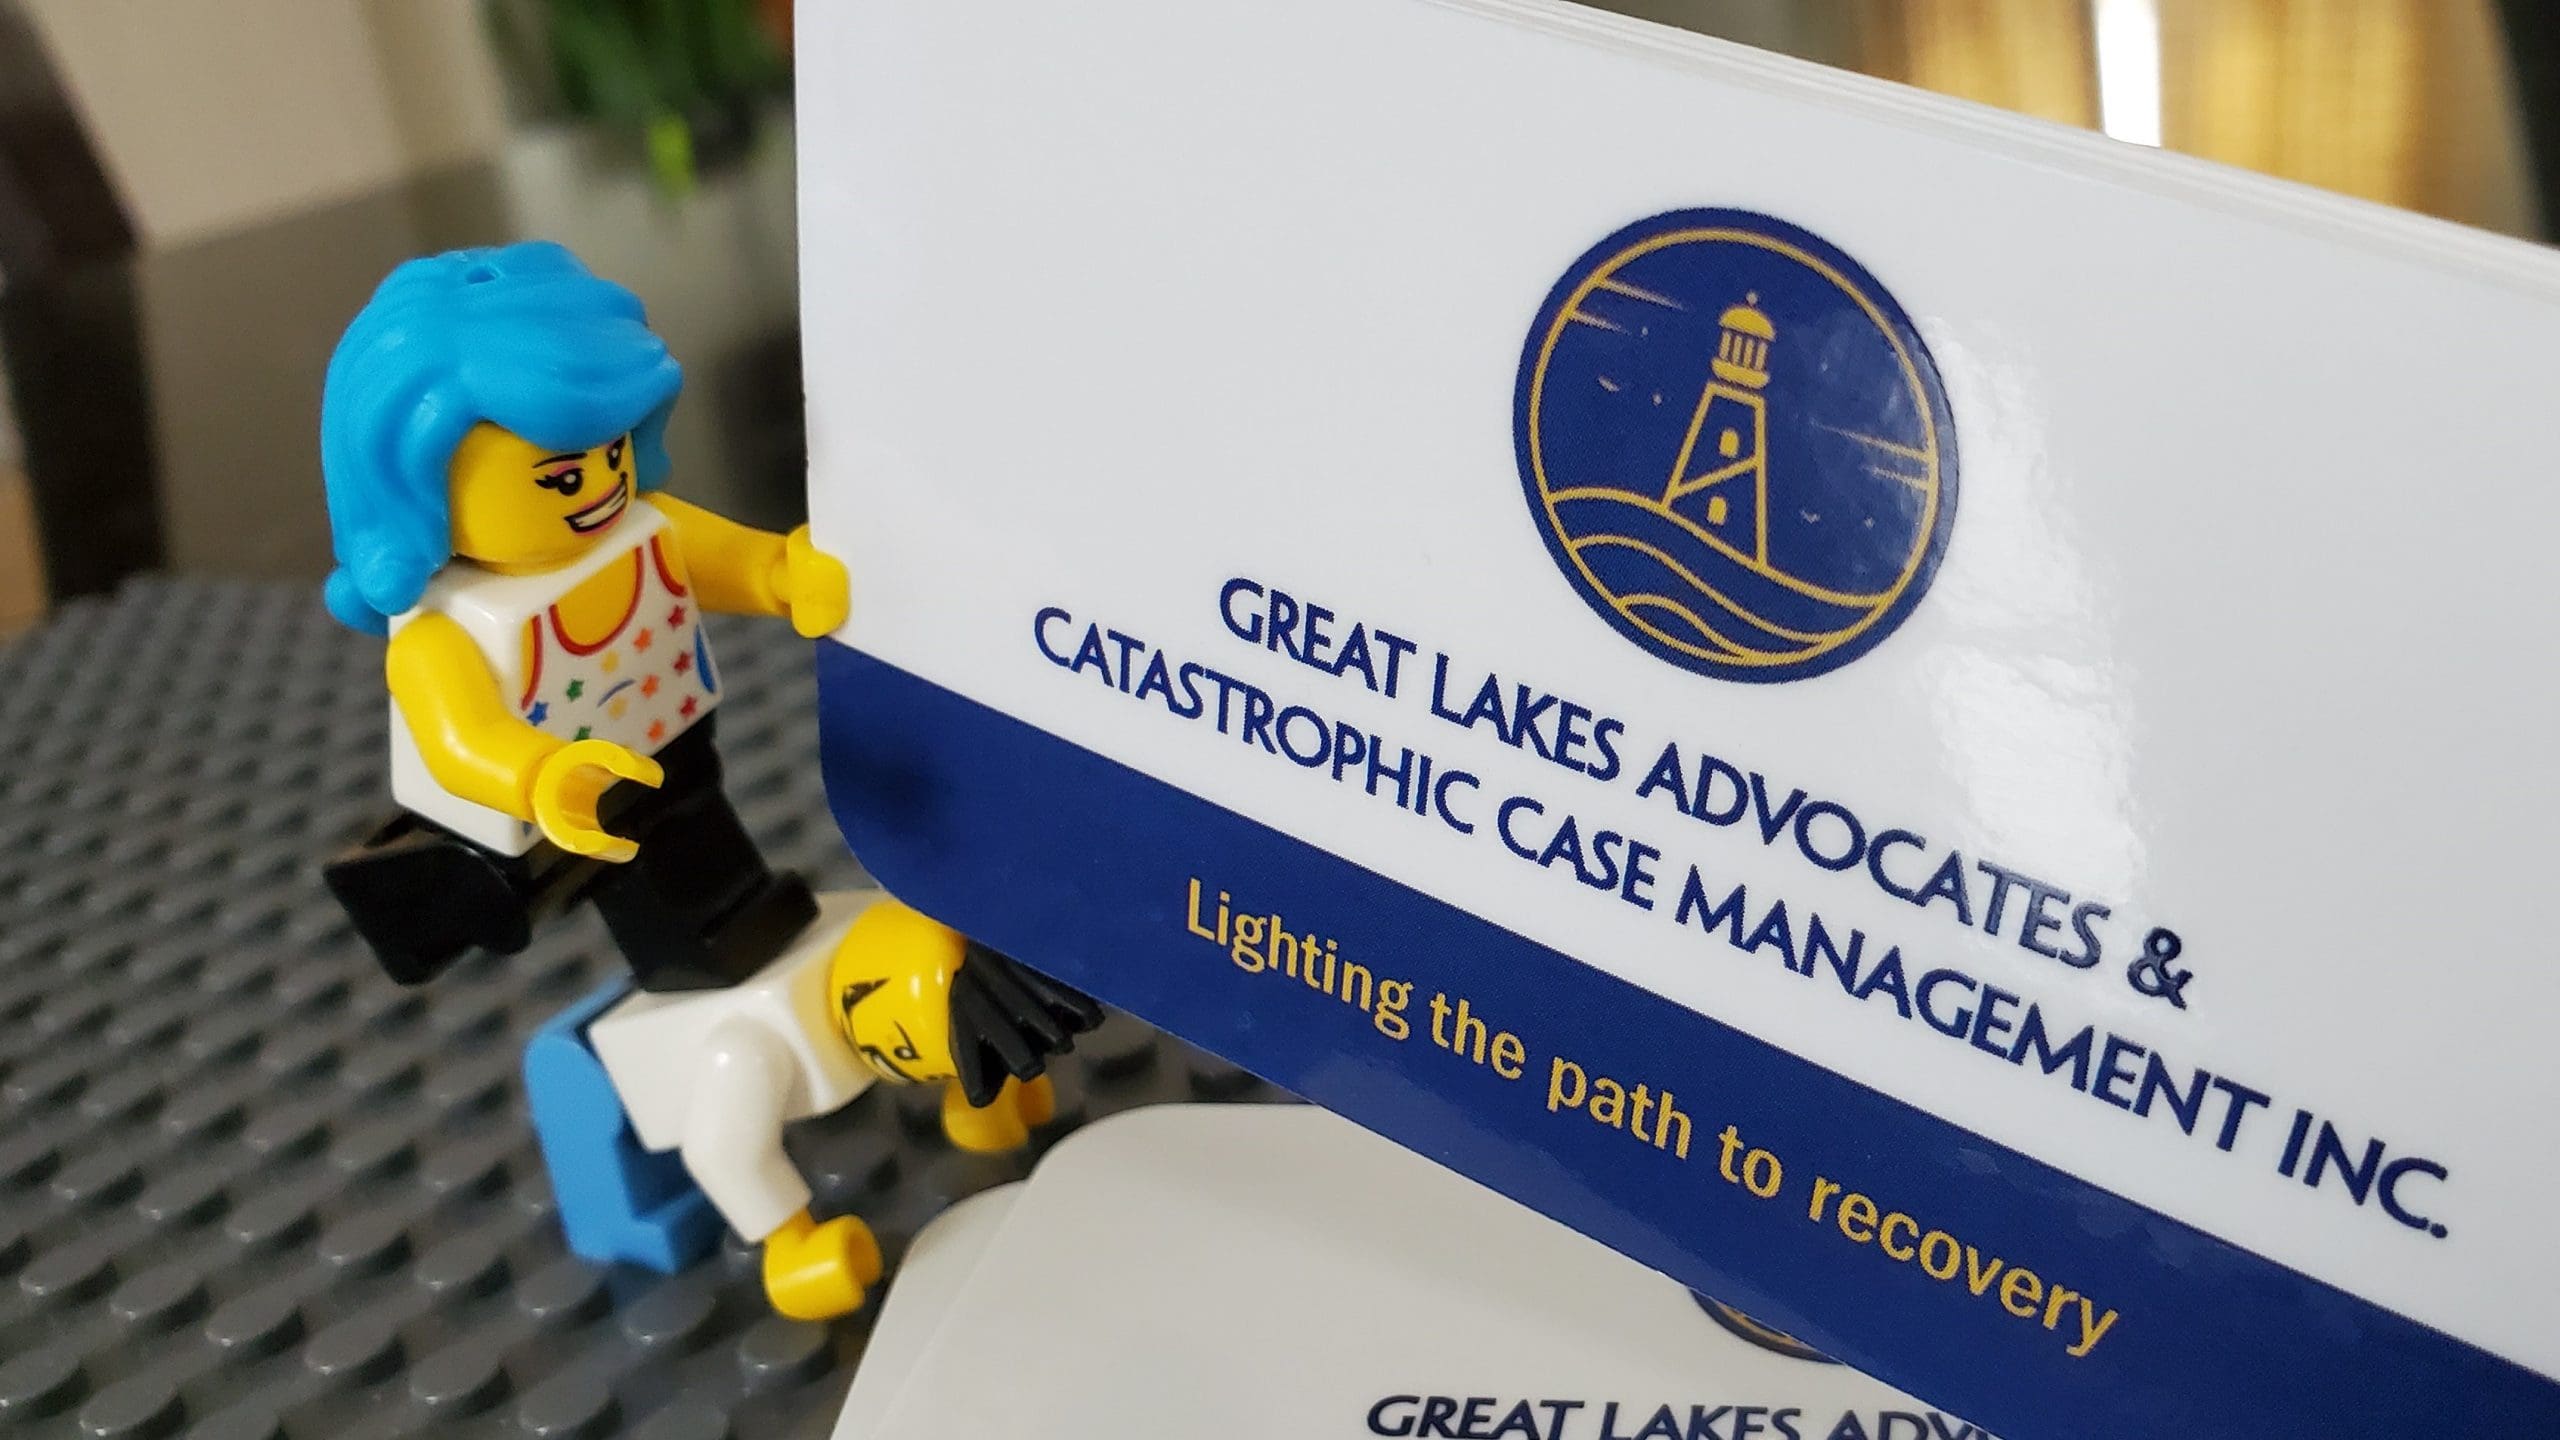 Great Lakes - Business Card Lego 03